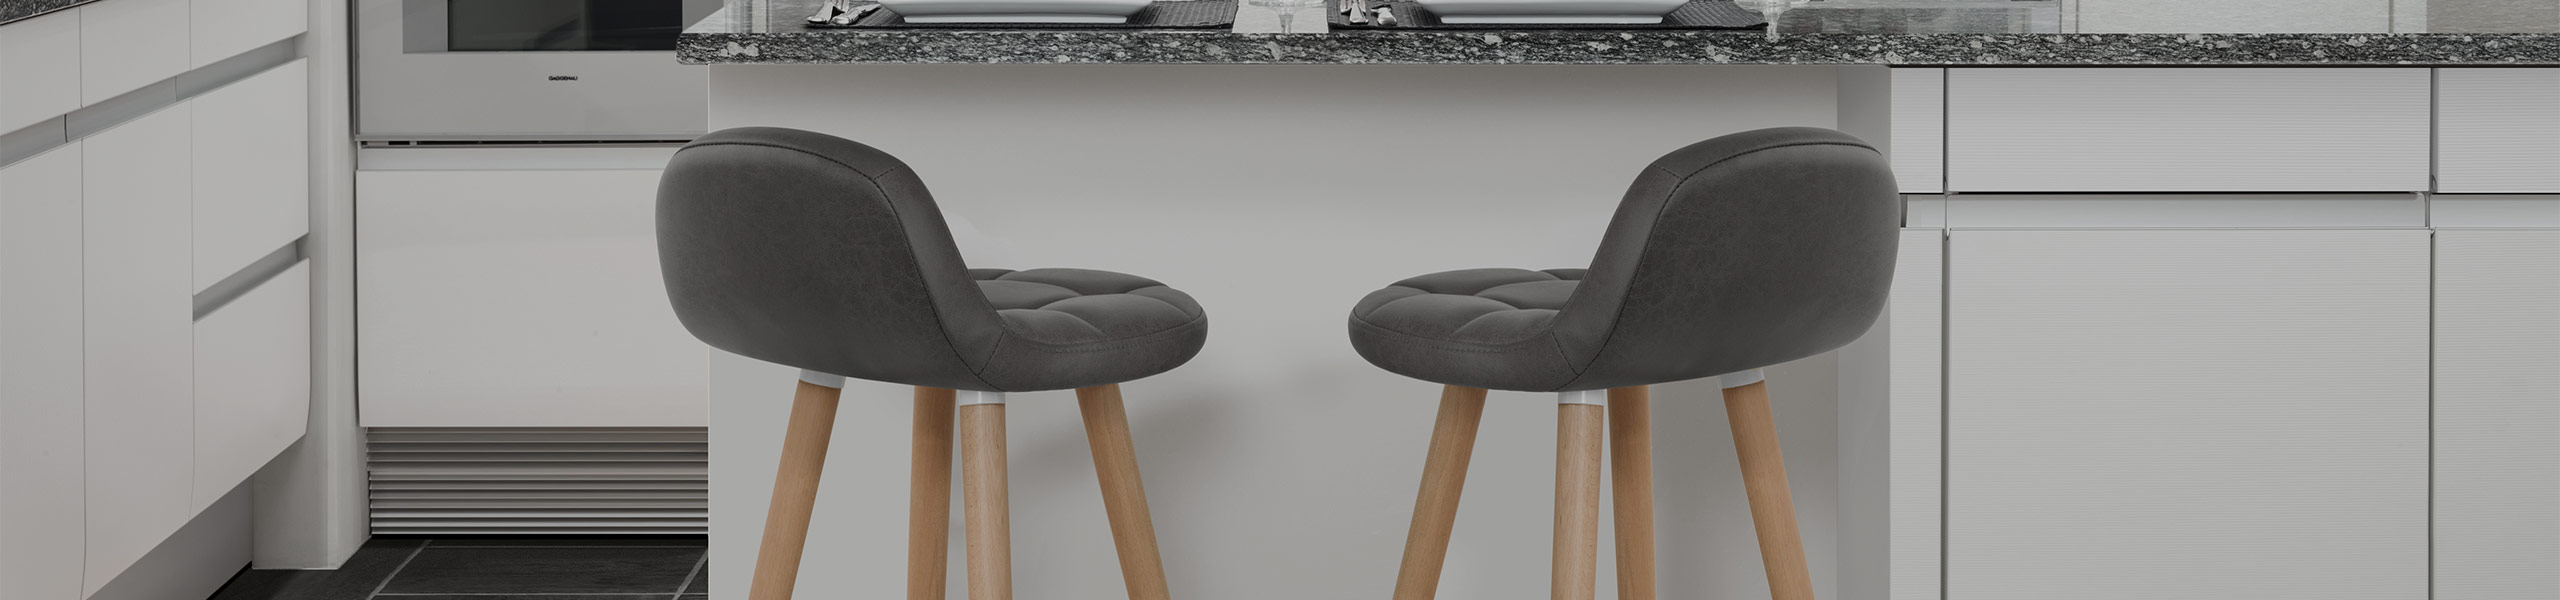 Sole Wooden Stool Grey Video Banner